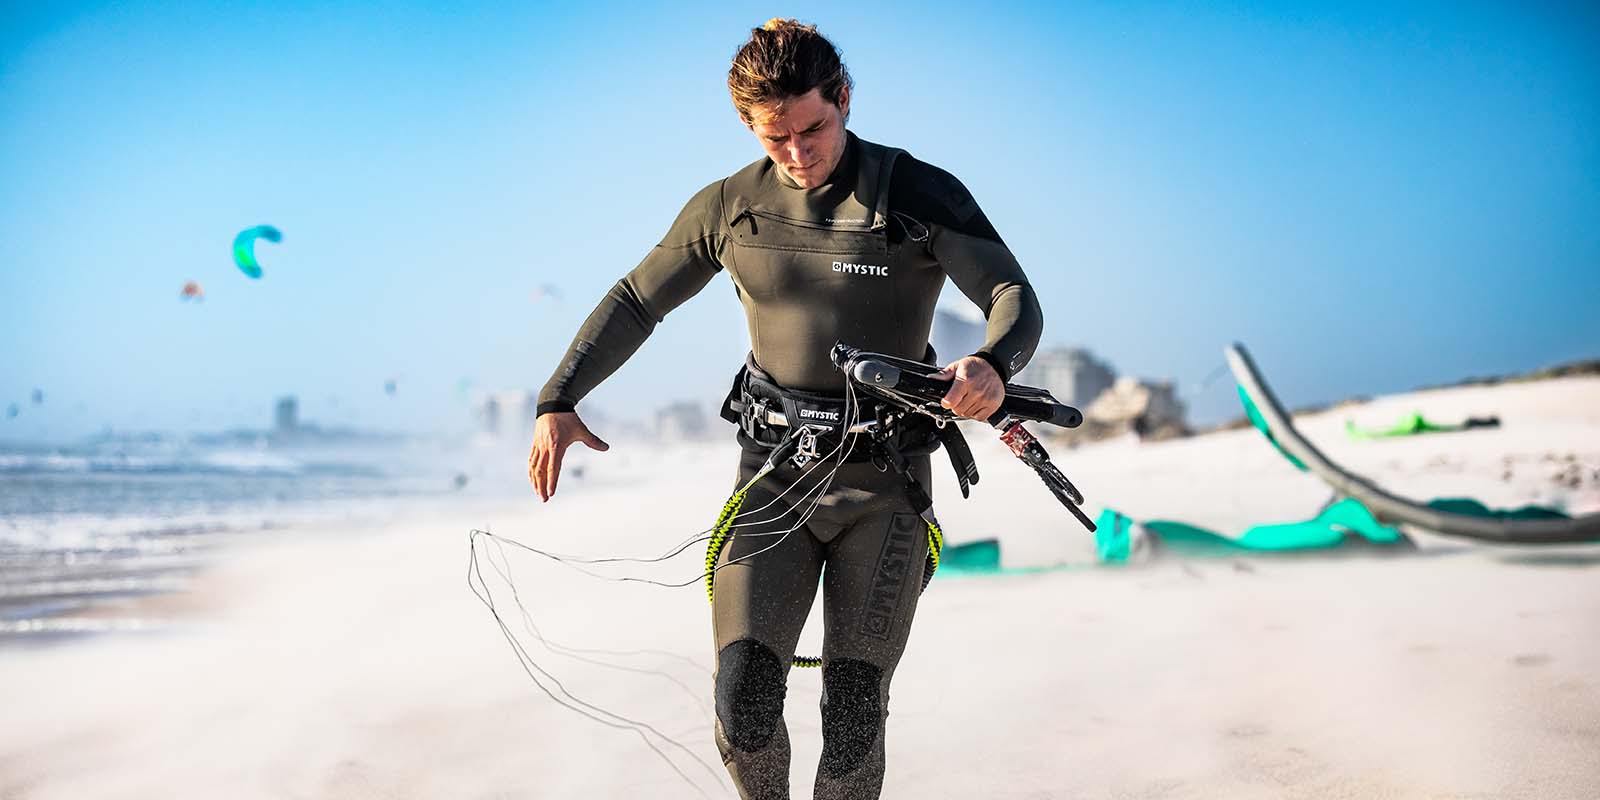 Caius constant Logisch Wetsuit Accessories Buyer's Guide - The Kitesurf Centre